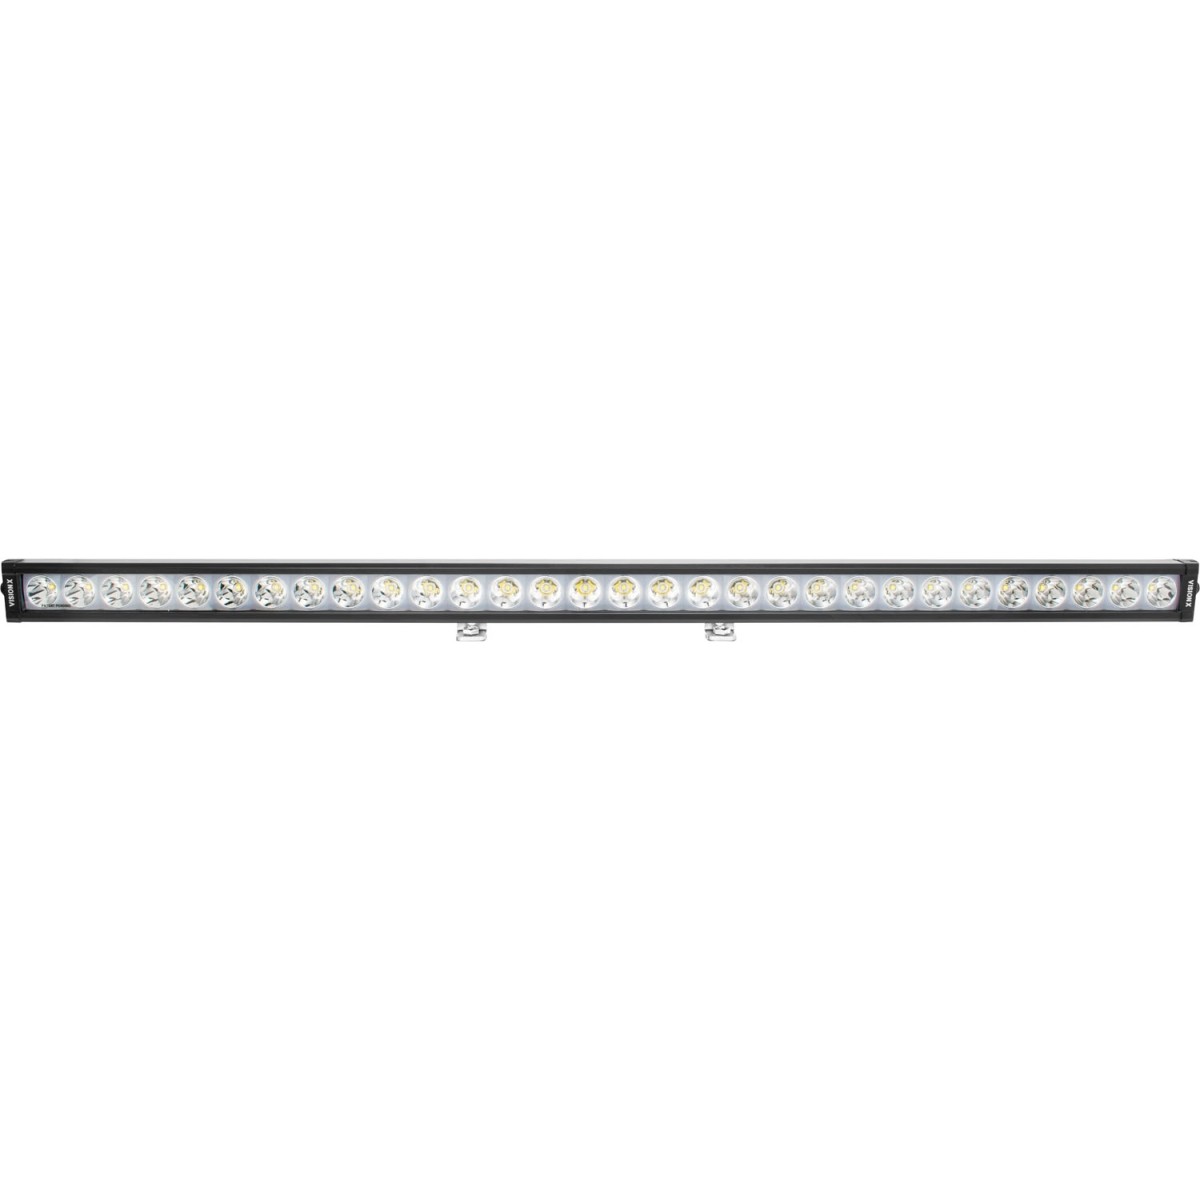 39.65IN XPL SERIES HALO 30 LED LIGHT BAR INCLUDING END CAP MOUNTING L BRACKET AN